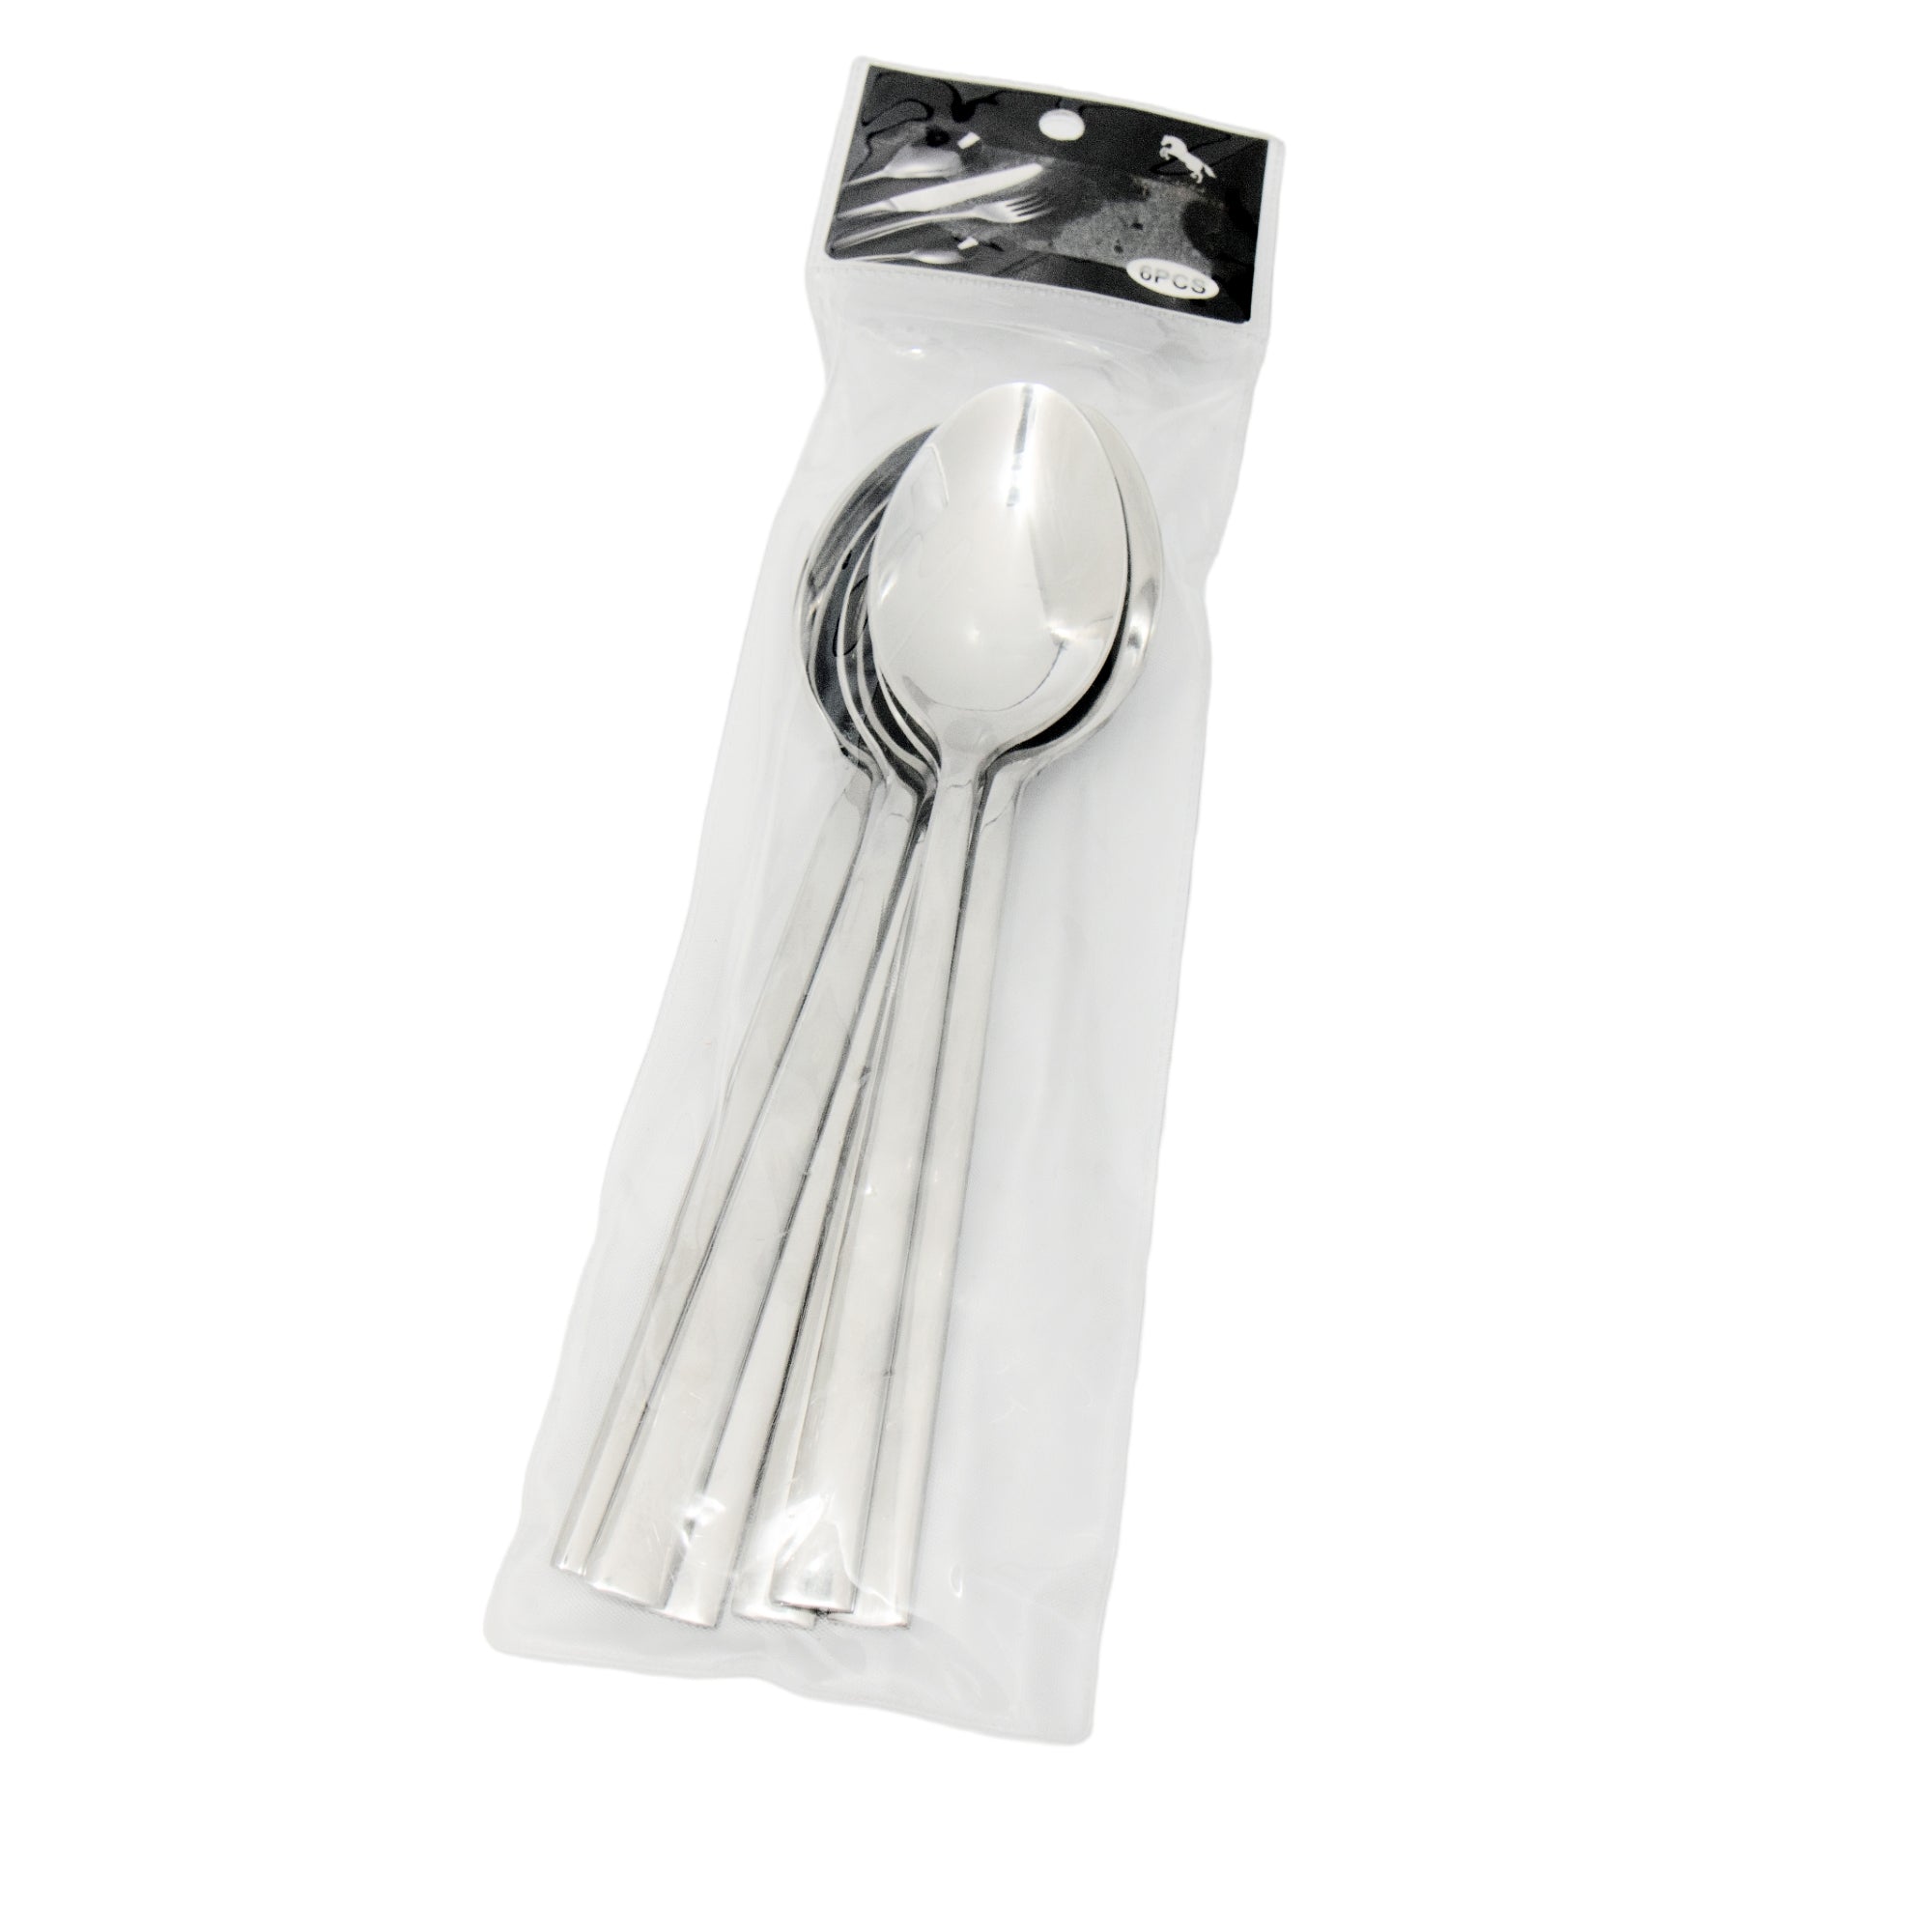 Stainless Steel Dessert Spoon 6pcs Square Handle CT785